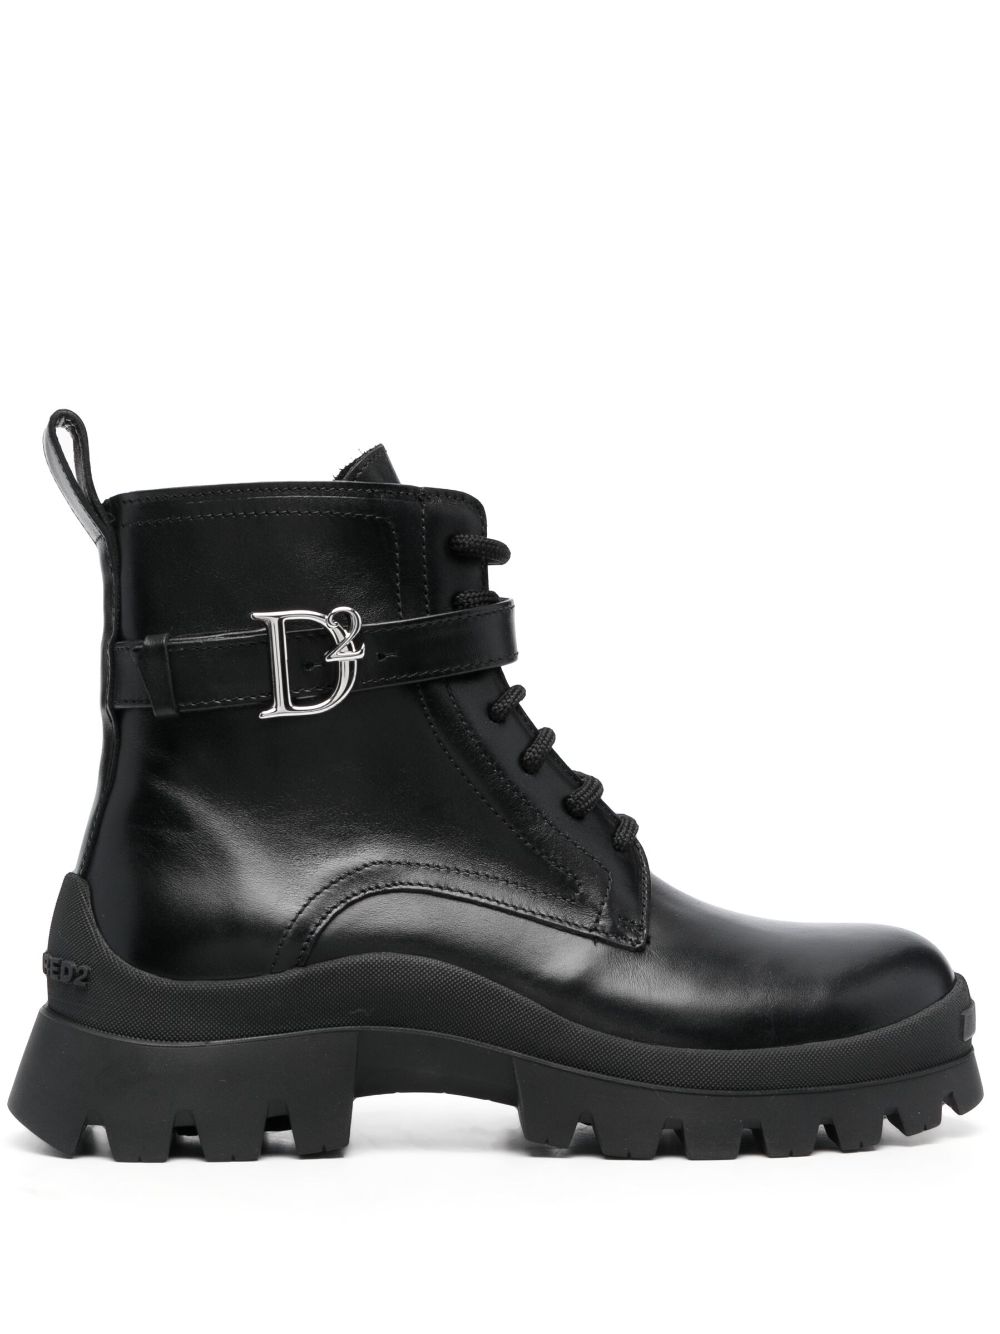 DSQUARED2 logo-buckle leather ankle boots - Black von DSQUARED2